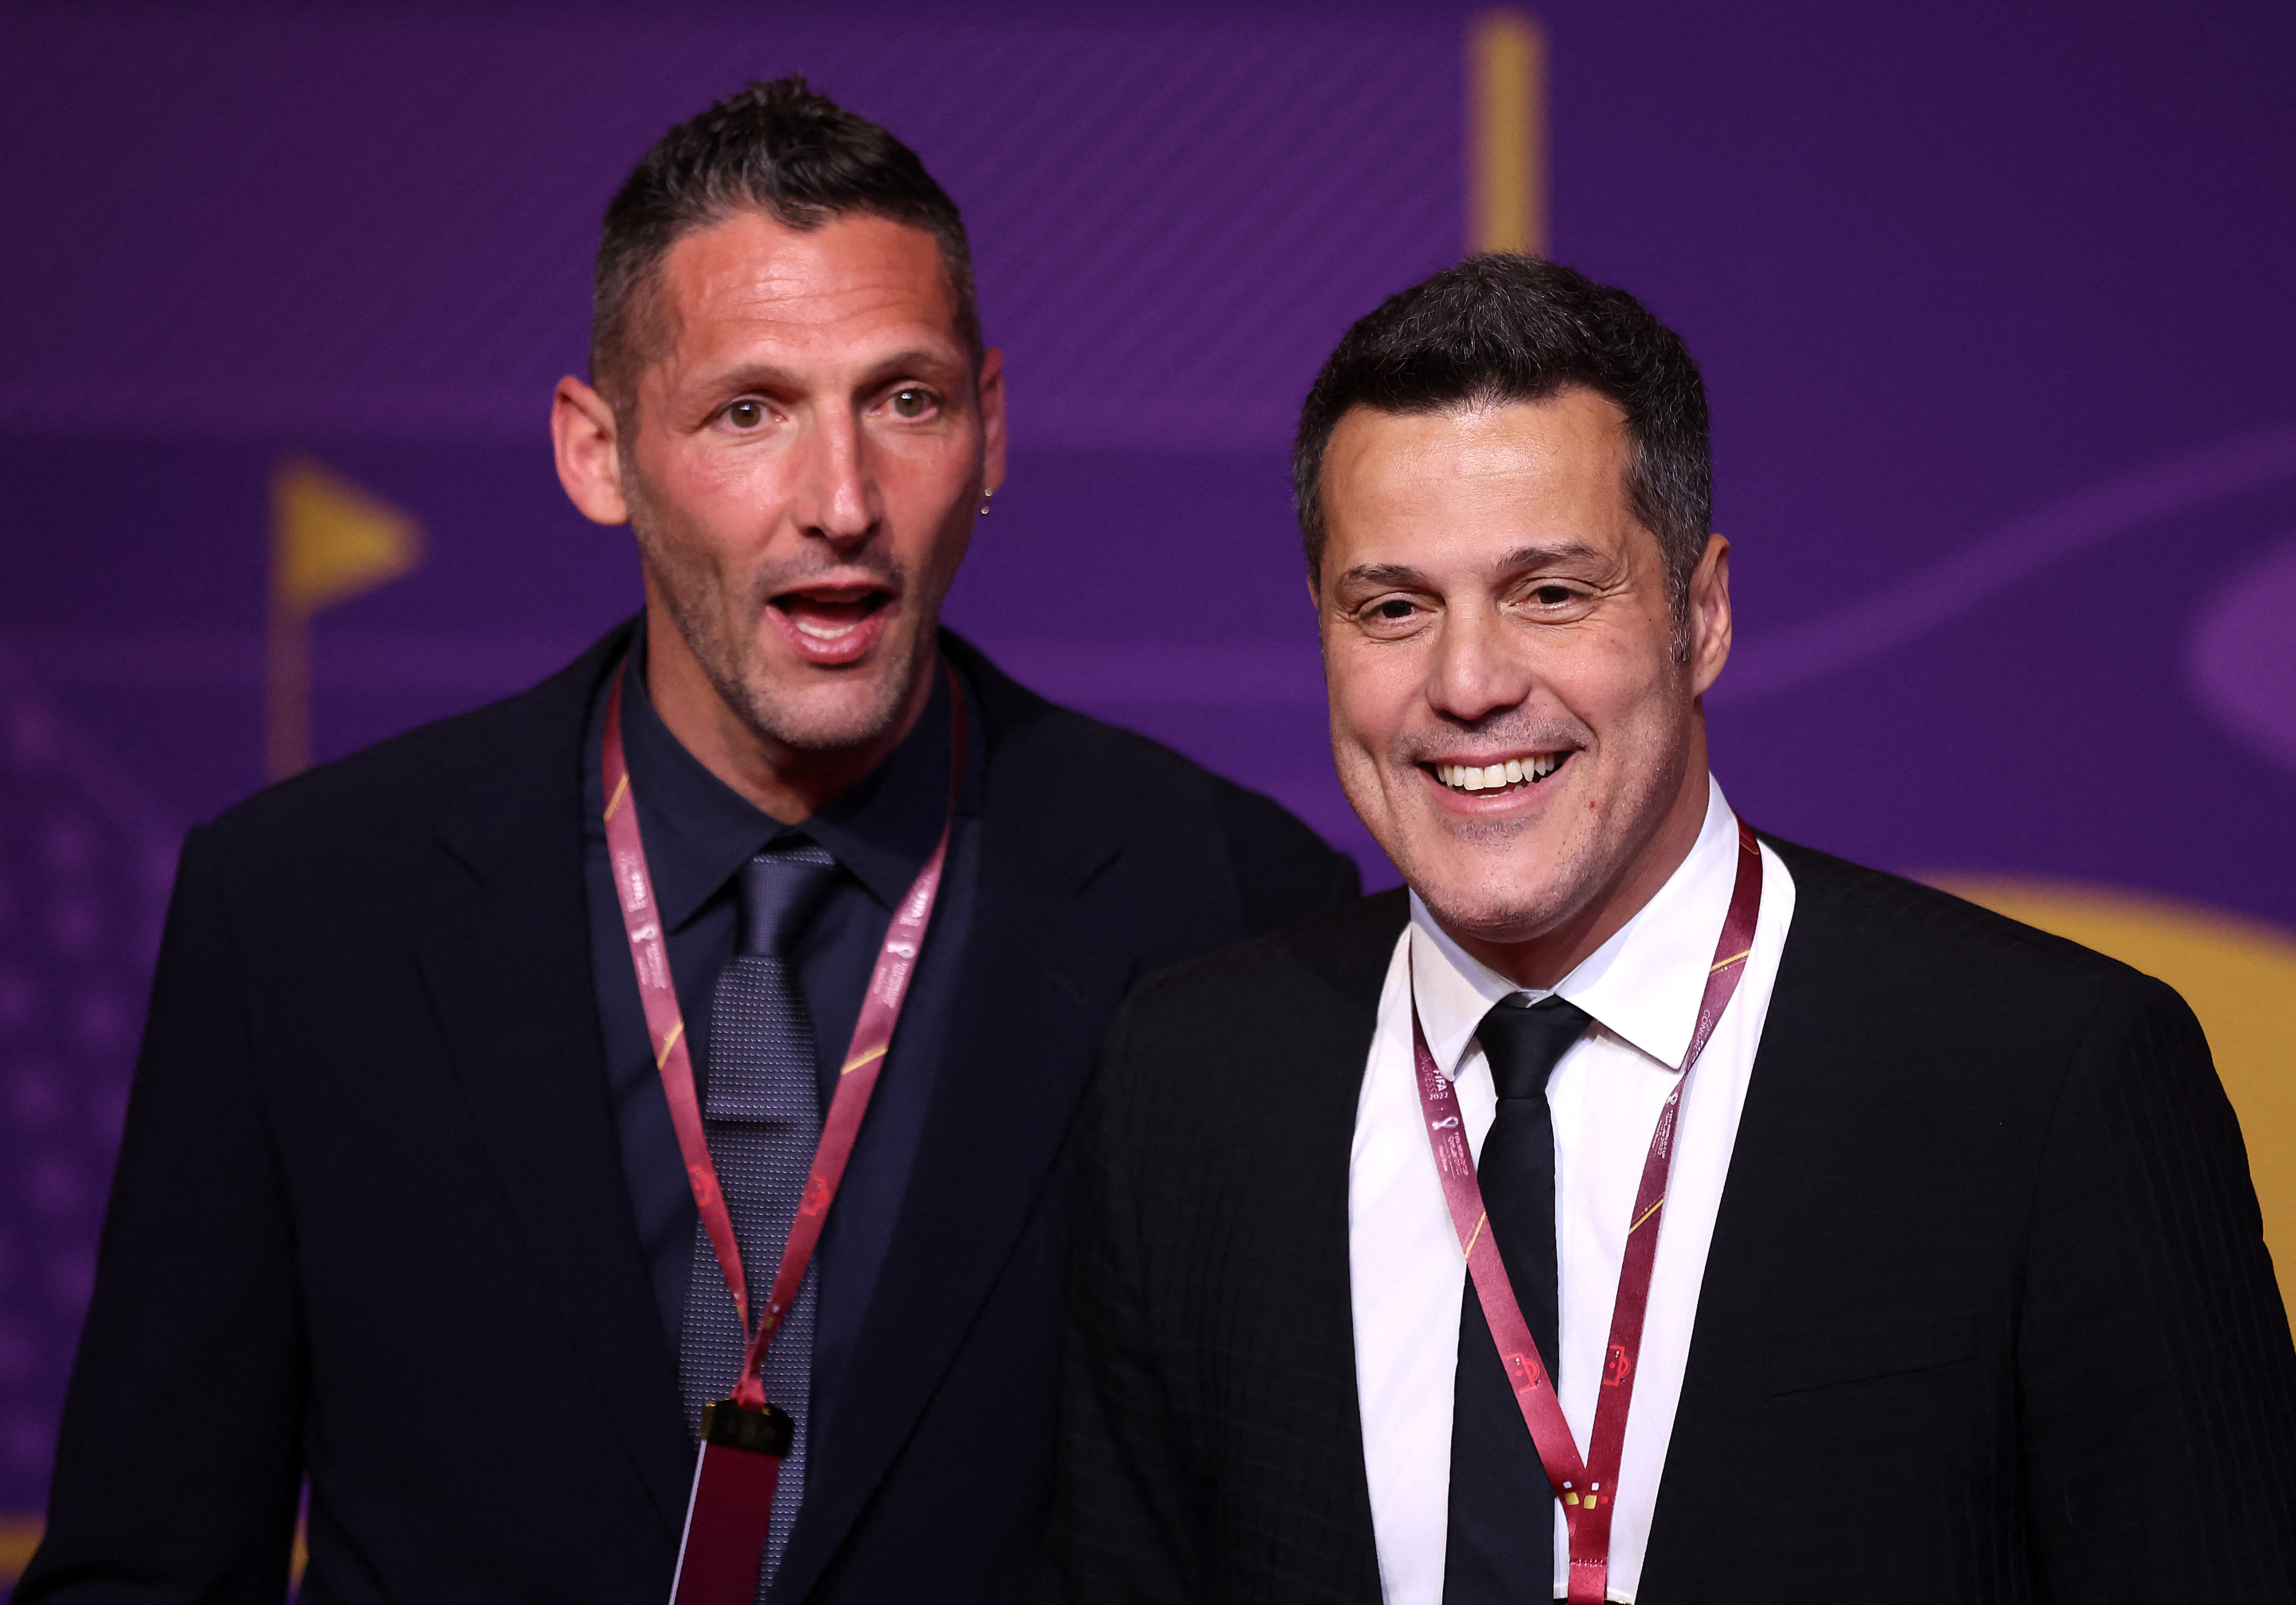 Soccer Football - World Cup - Final Draw - Doha Exhibition & Convention Center, Doha, Qatar - April 1, 2022 Former player Julio Cesar and Marco Materazzi arrive ahead of the draw REUTERS/Carl Recine